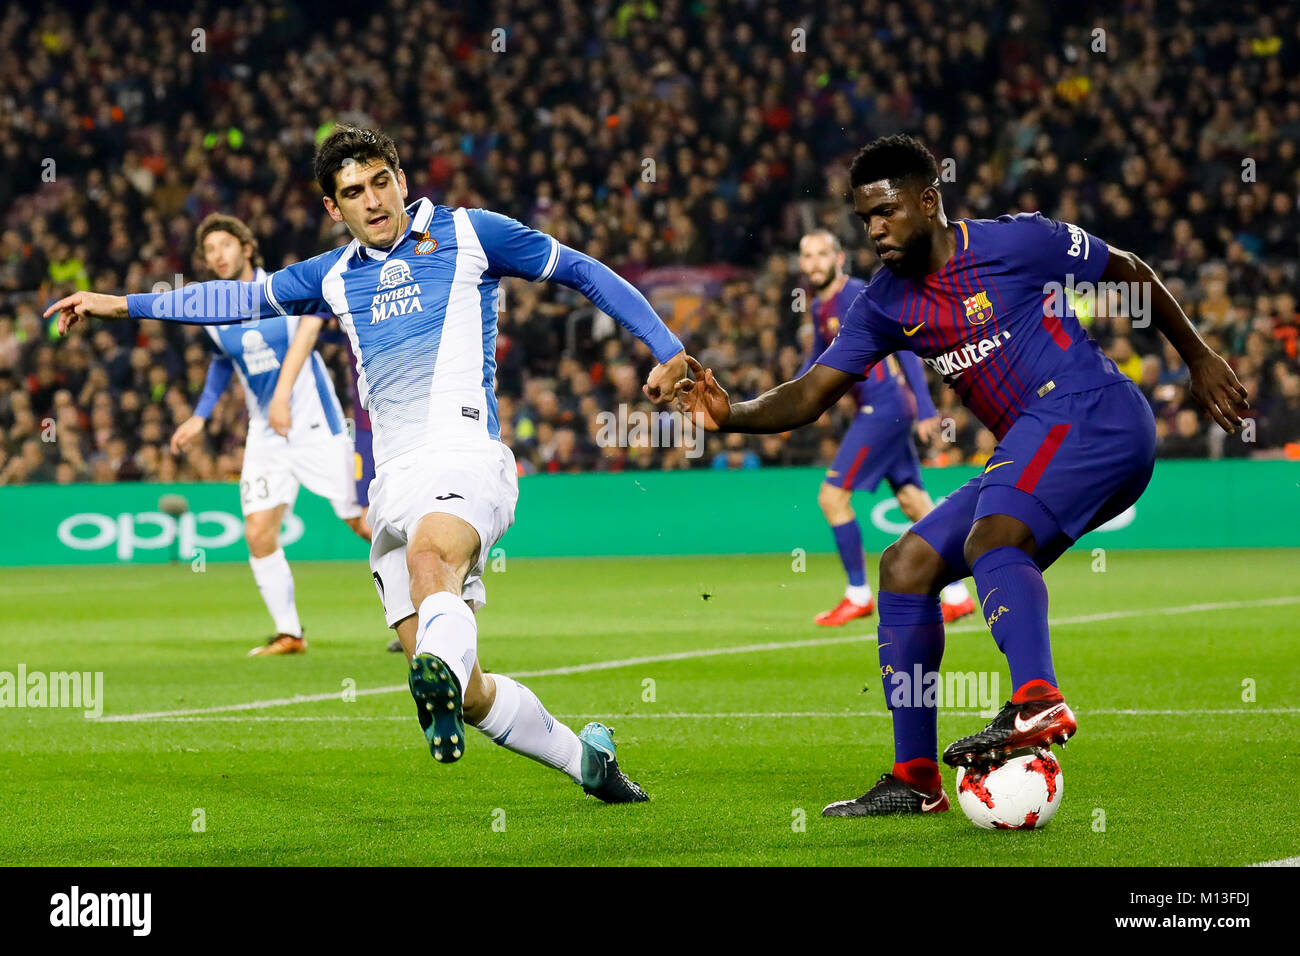 Camp Nou, Barcelona, Spain. 25th January, 2018. Samuel Umtiti dribbling to Gerard Moreno while that tries to stole it during the quarter finals of Copa de S.M. del Rey 17/18 on the match between Fc Barcelona and Rcd Espanyol at Camp Nou, Barcelona, Spain. Credit: G. Loinaz/Alamy Live News Stock Photo